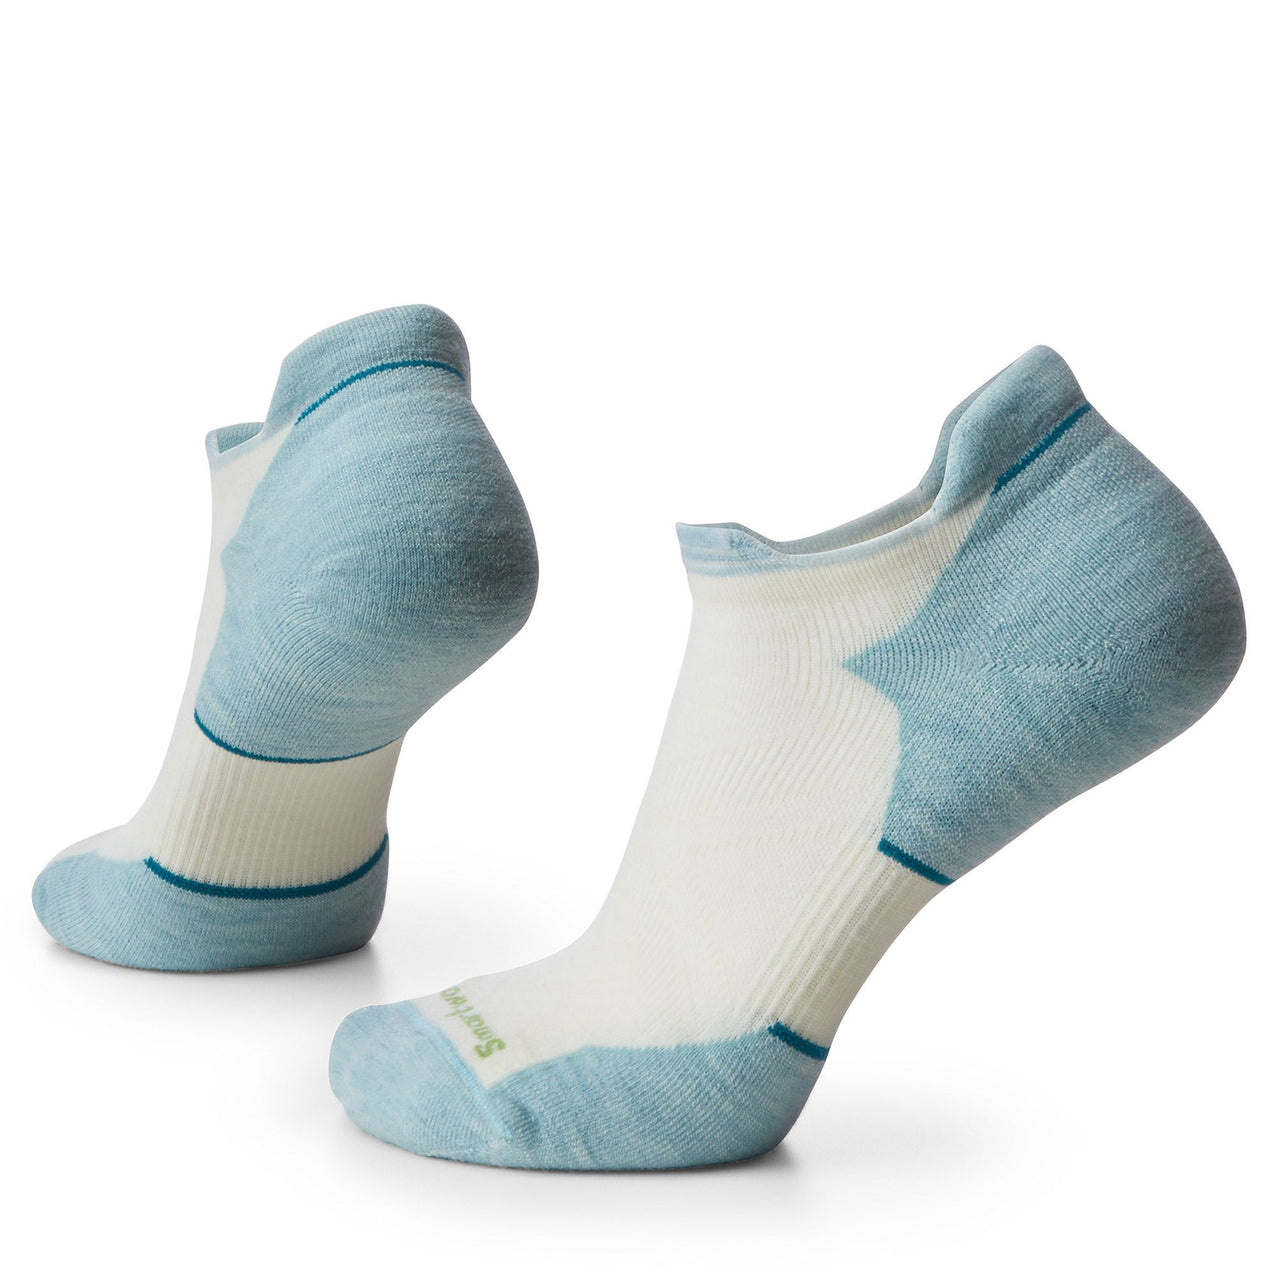 Women's Run Targeted Cushion Low Ankle Socks SW001671